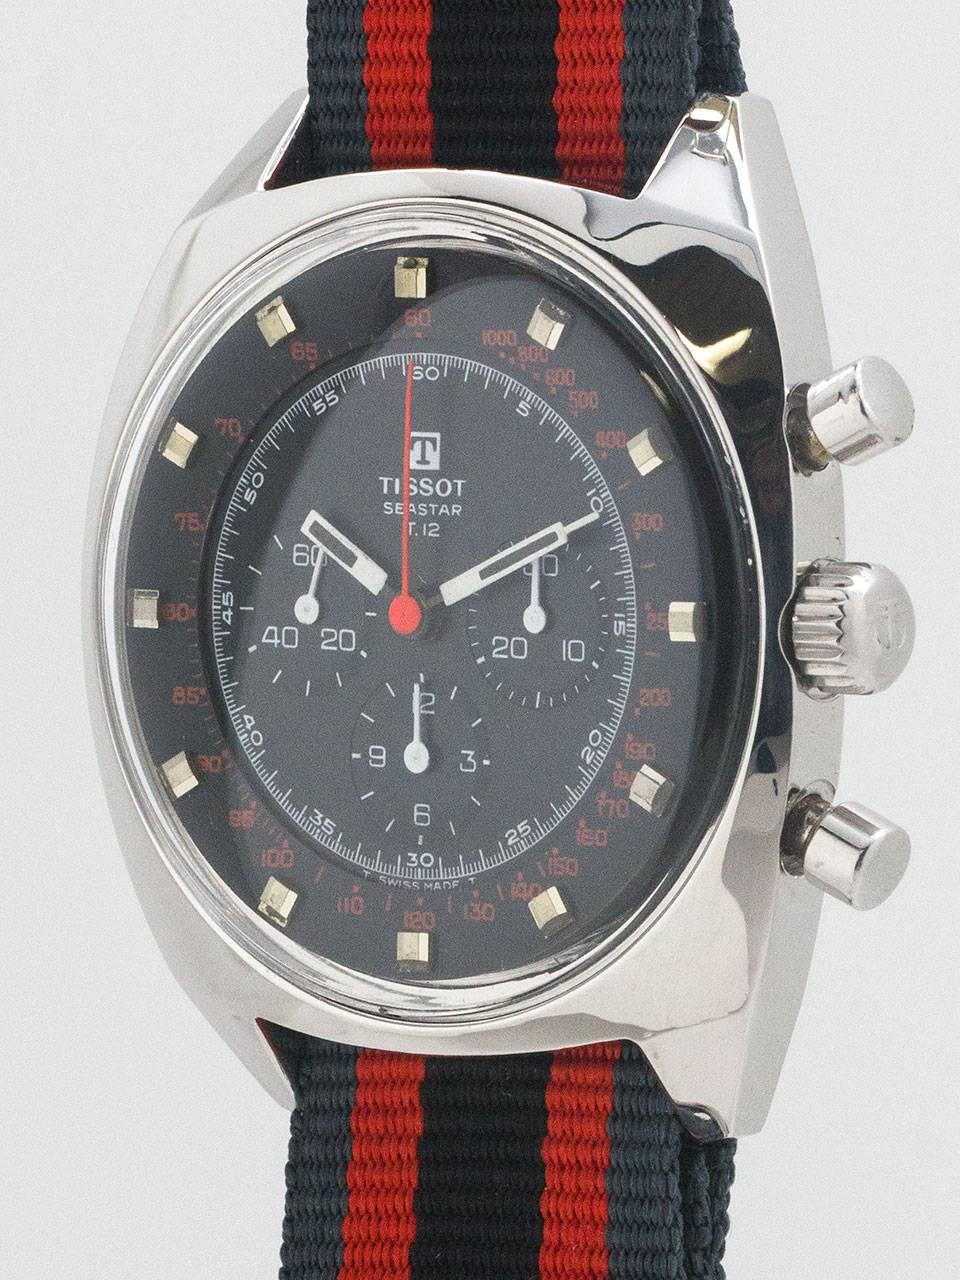 Tissot Stainless Steel Seastar T-12 Chronograph Wristwatch circa 1970s In Excellent Condition For Sale In West Hollywood, CA